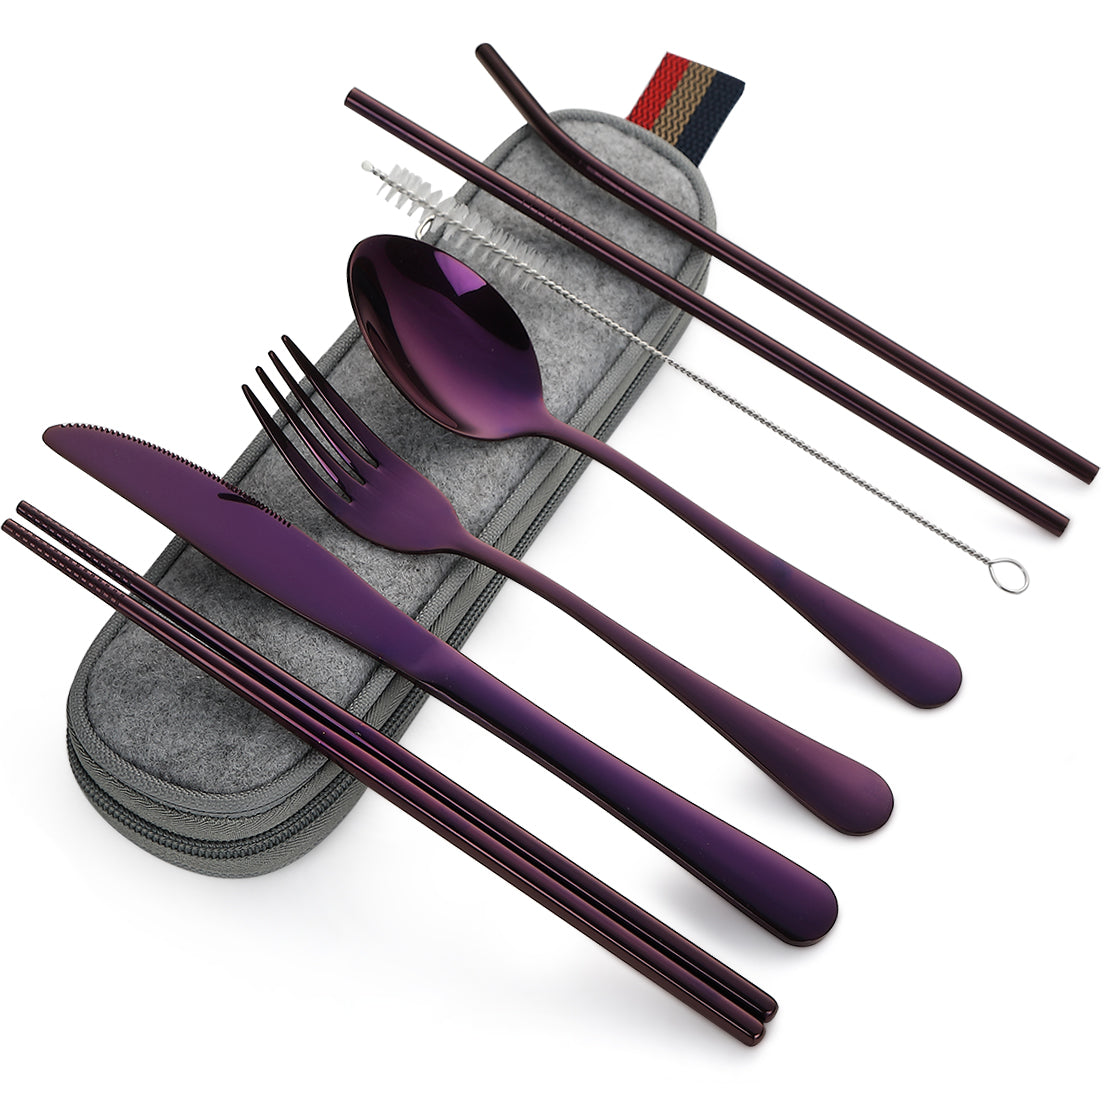 Devico Portable Utensils, Travel Camping Cutlery Set, 8-Piece including Knife Fork Spoon Chopsticks Cleaning Brush Straws Portable Case, Stainless Steel Flatware set (8-piece Purple)